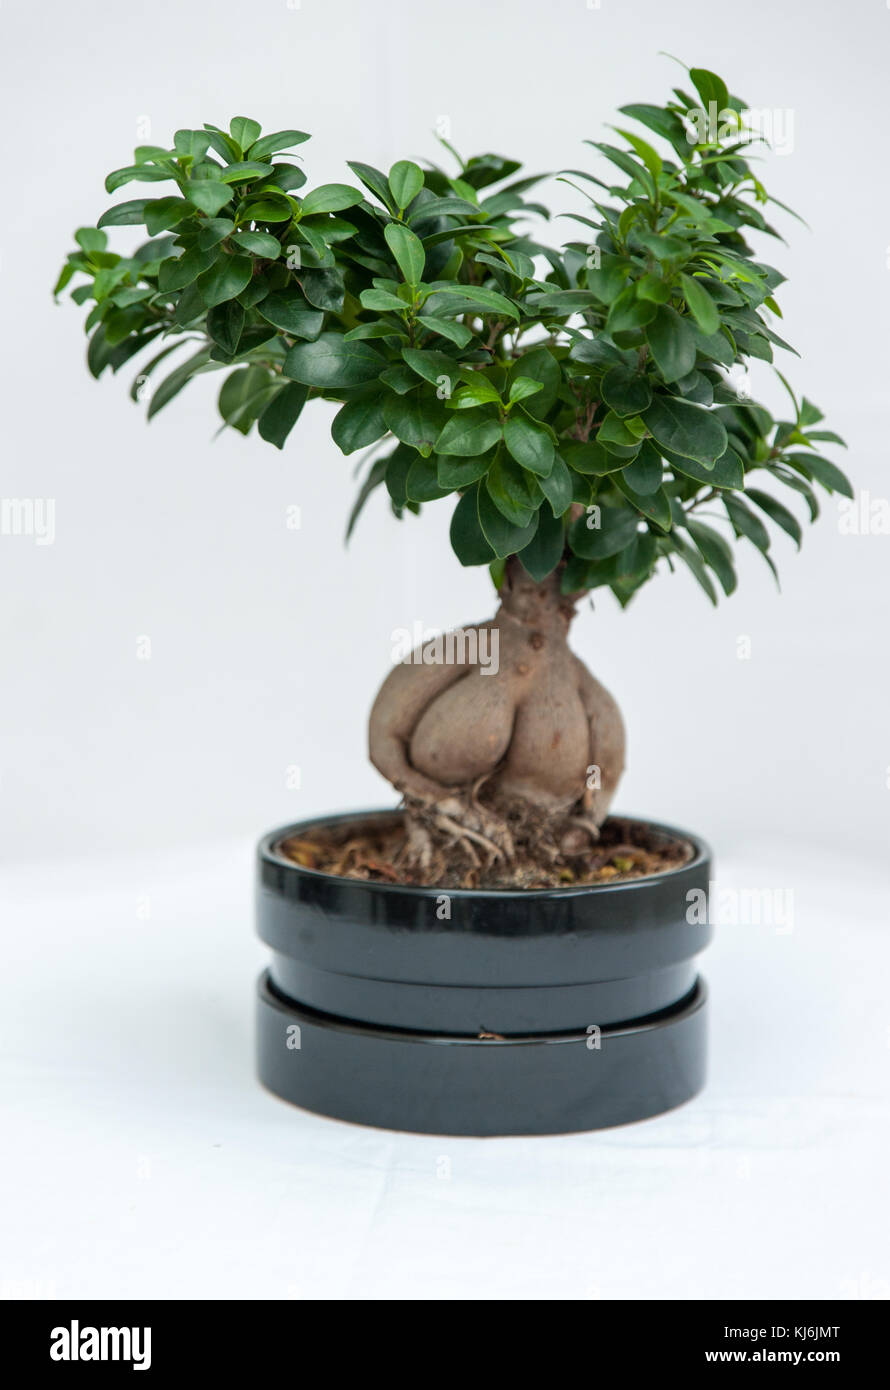 Bonzai tree in a pot with white background Stock Photo - Alamy